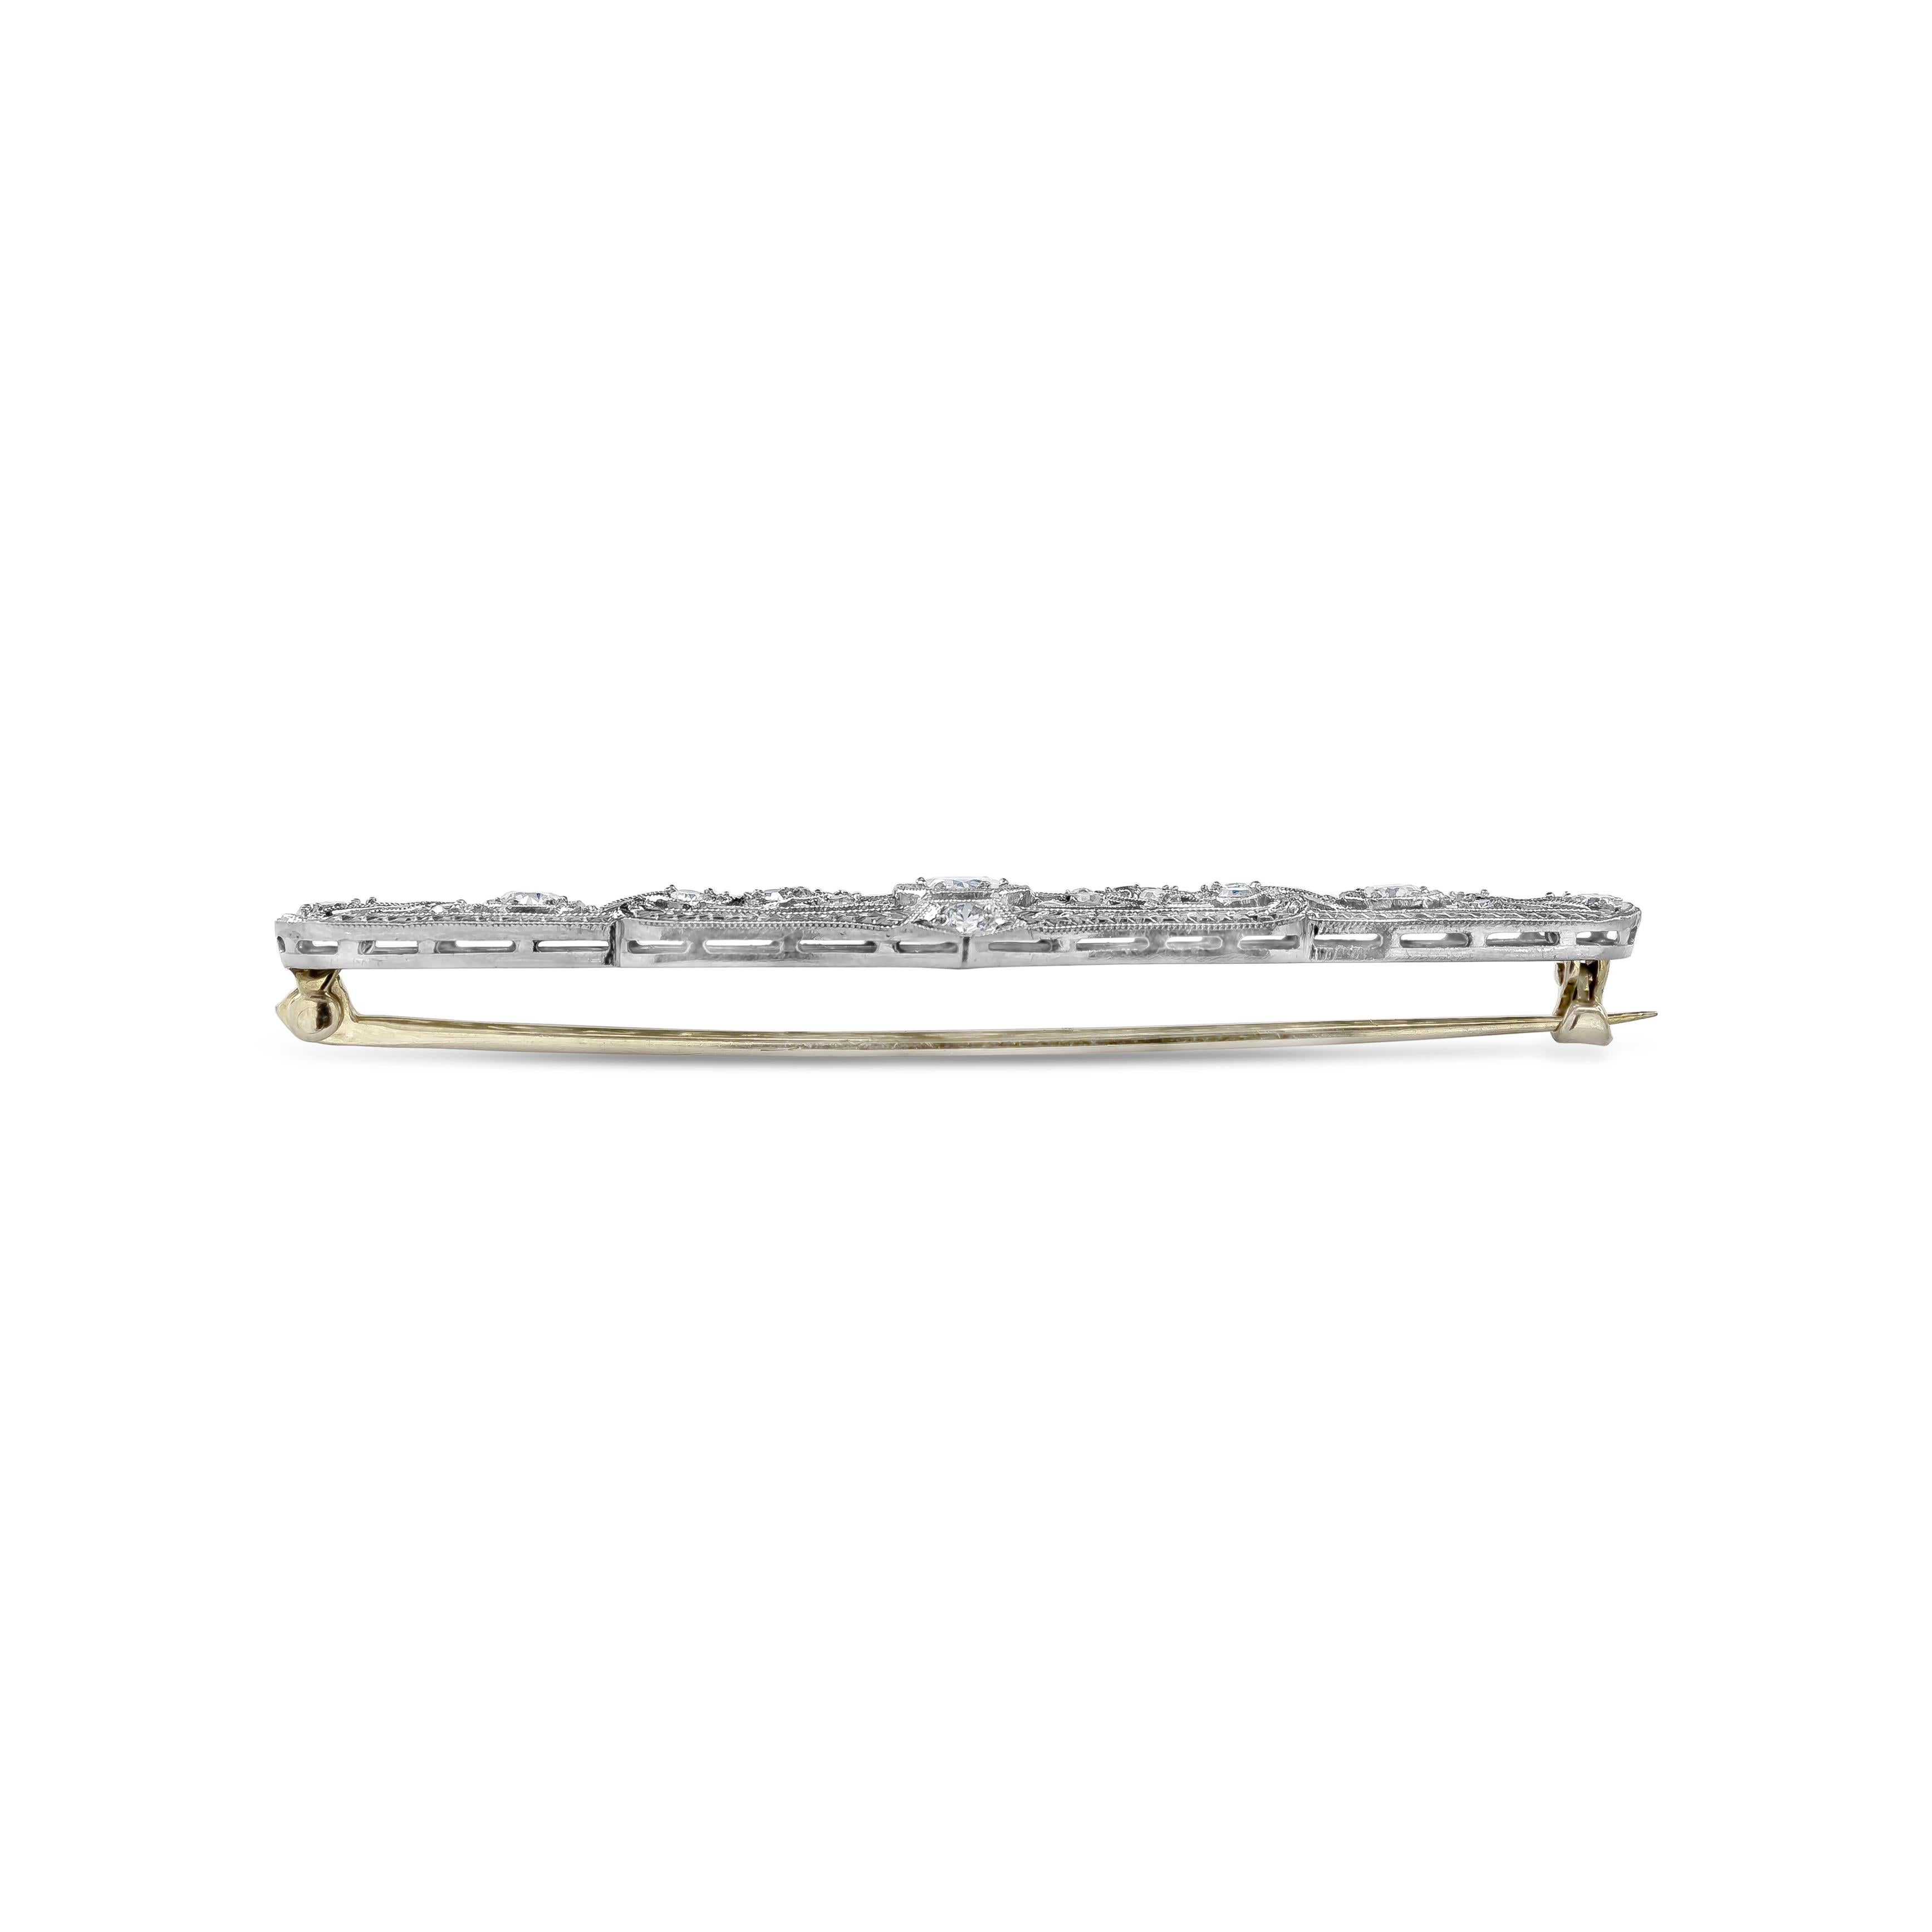 A long panel brooch of open-work design set with old European cut diamonds weighing 0.88 carats total. Hand-engraved with an intricate design. Made in Platinum.

